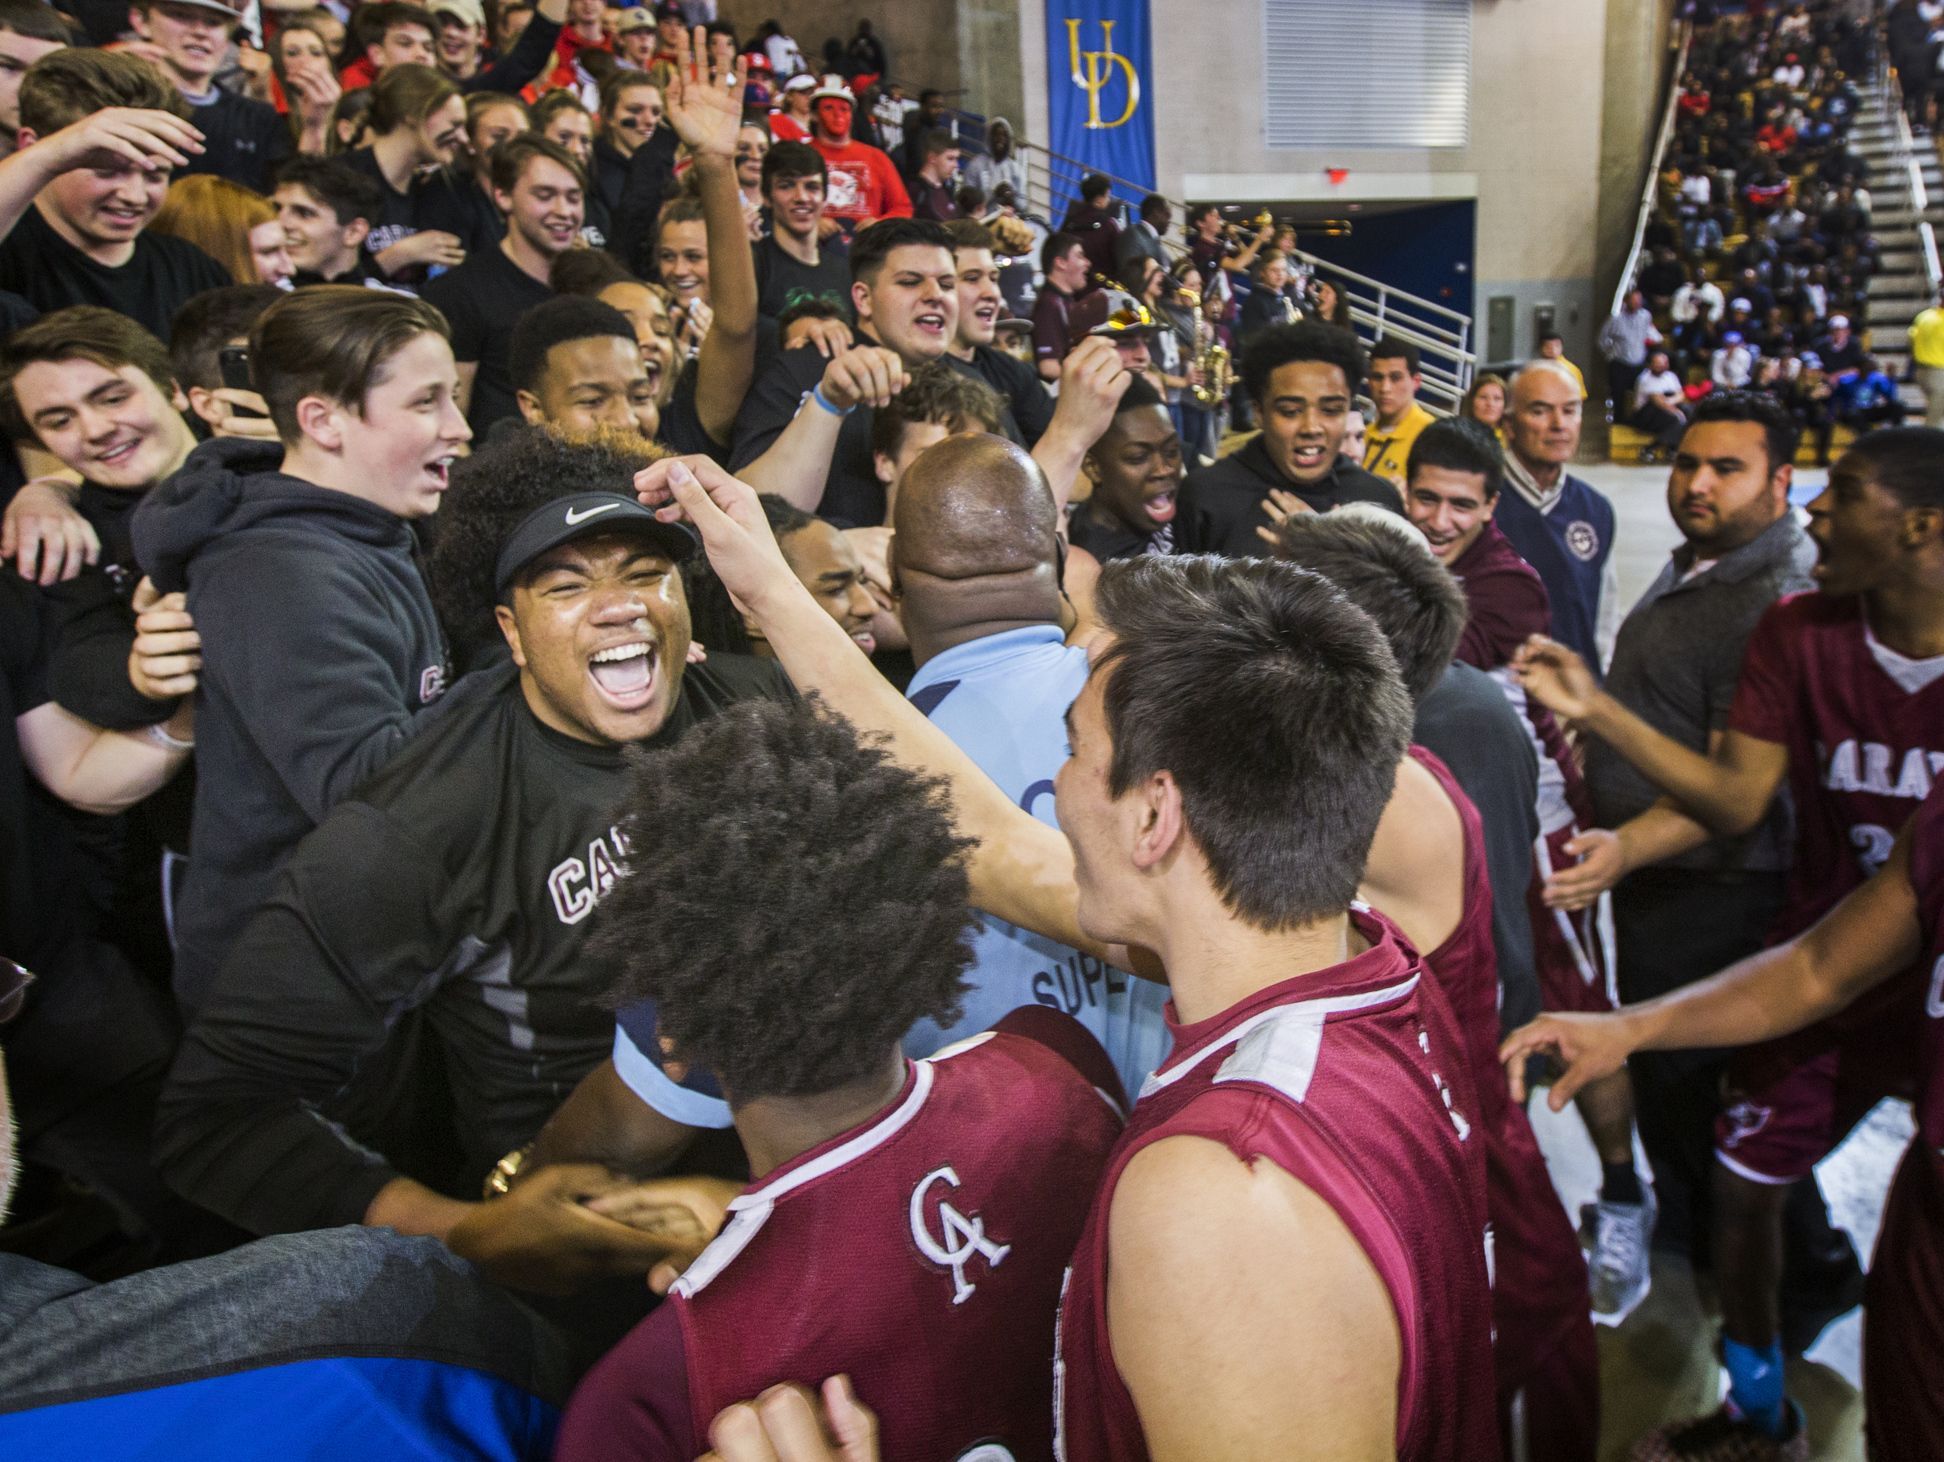 Caravel players and fans celebrate following their 48-47 win over St. Thomas More Academy in the DIAA Boy's State Basketball Tournament semi-finals at the Bob Carpenter Center in Newark on Thursday evening.